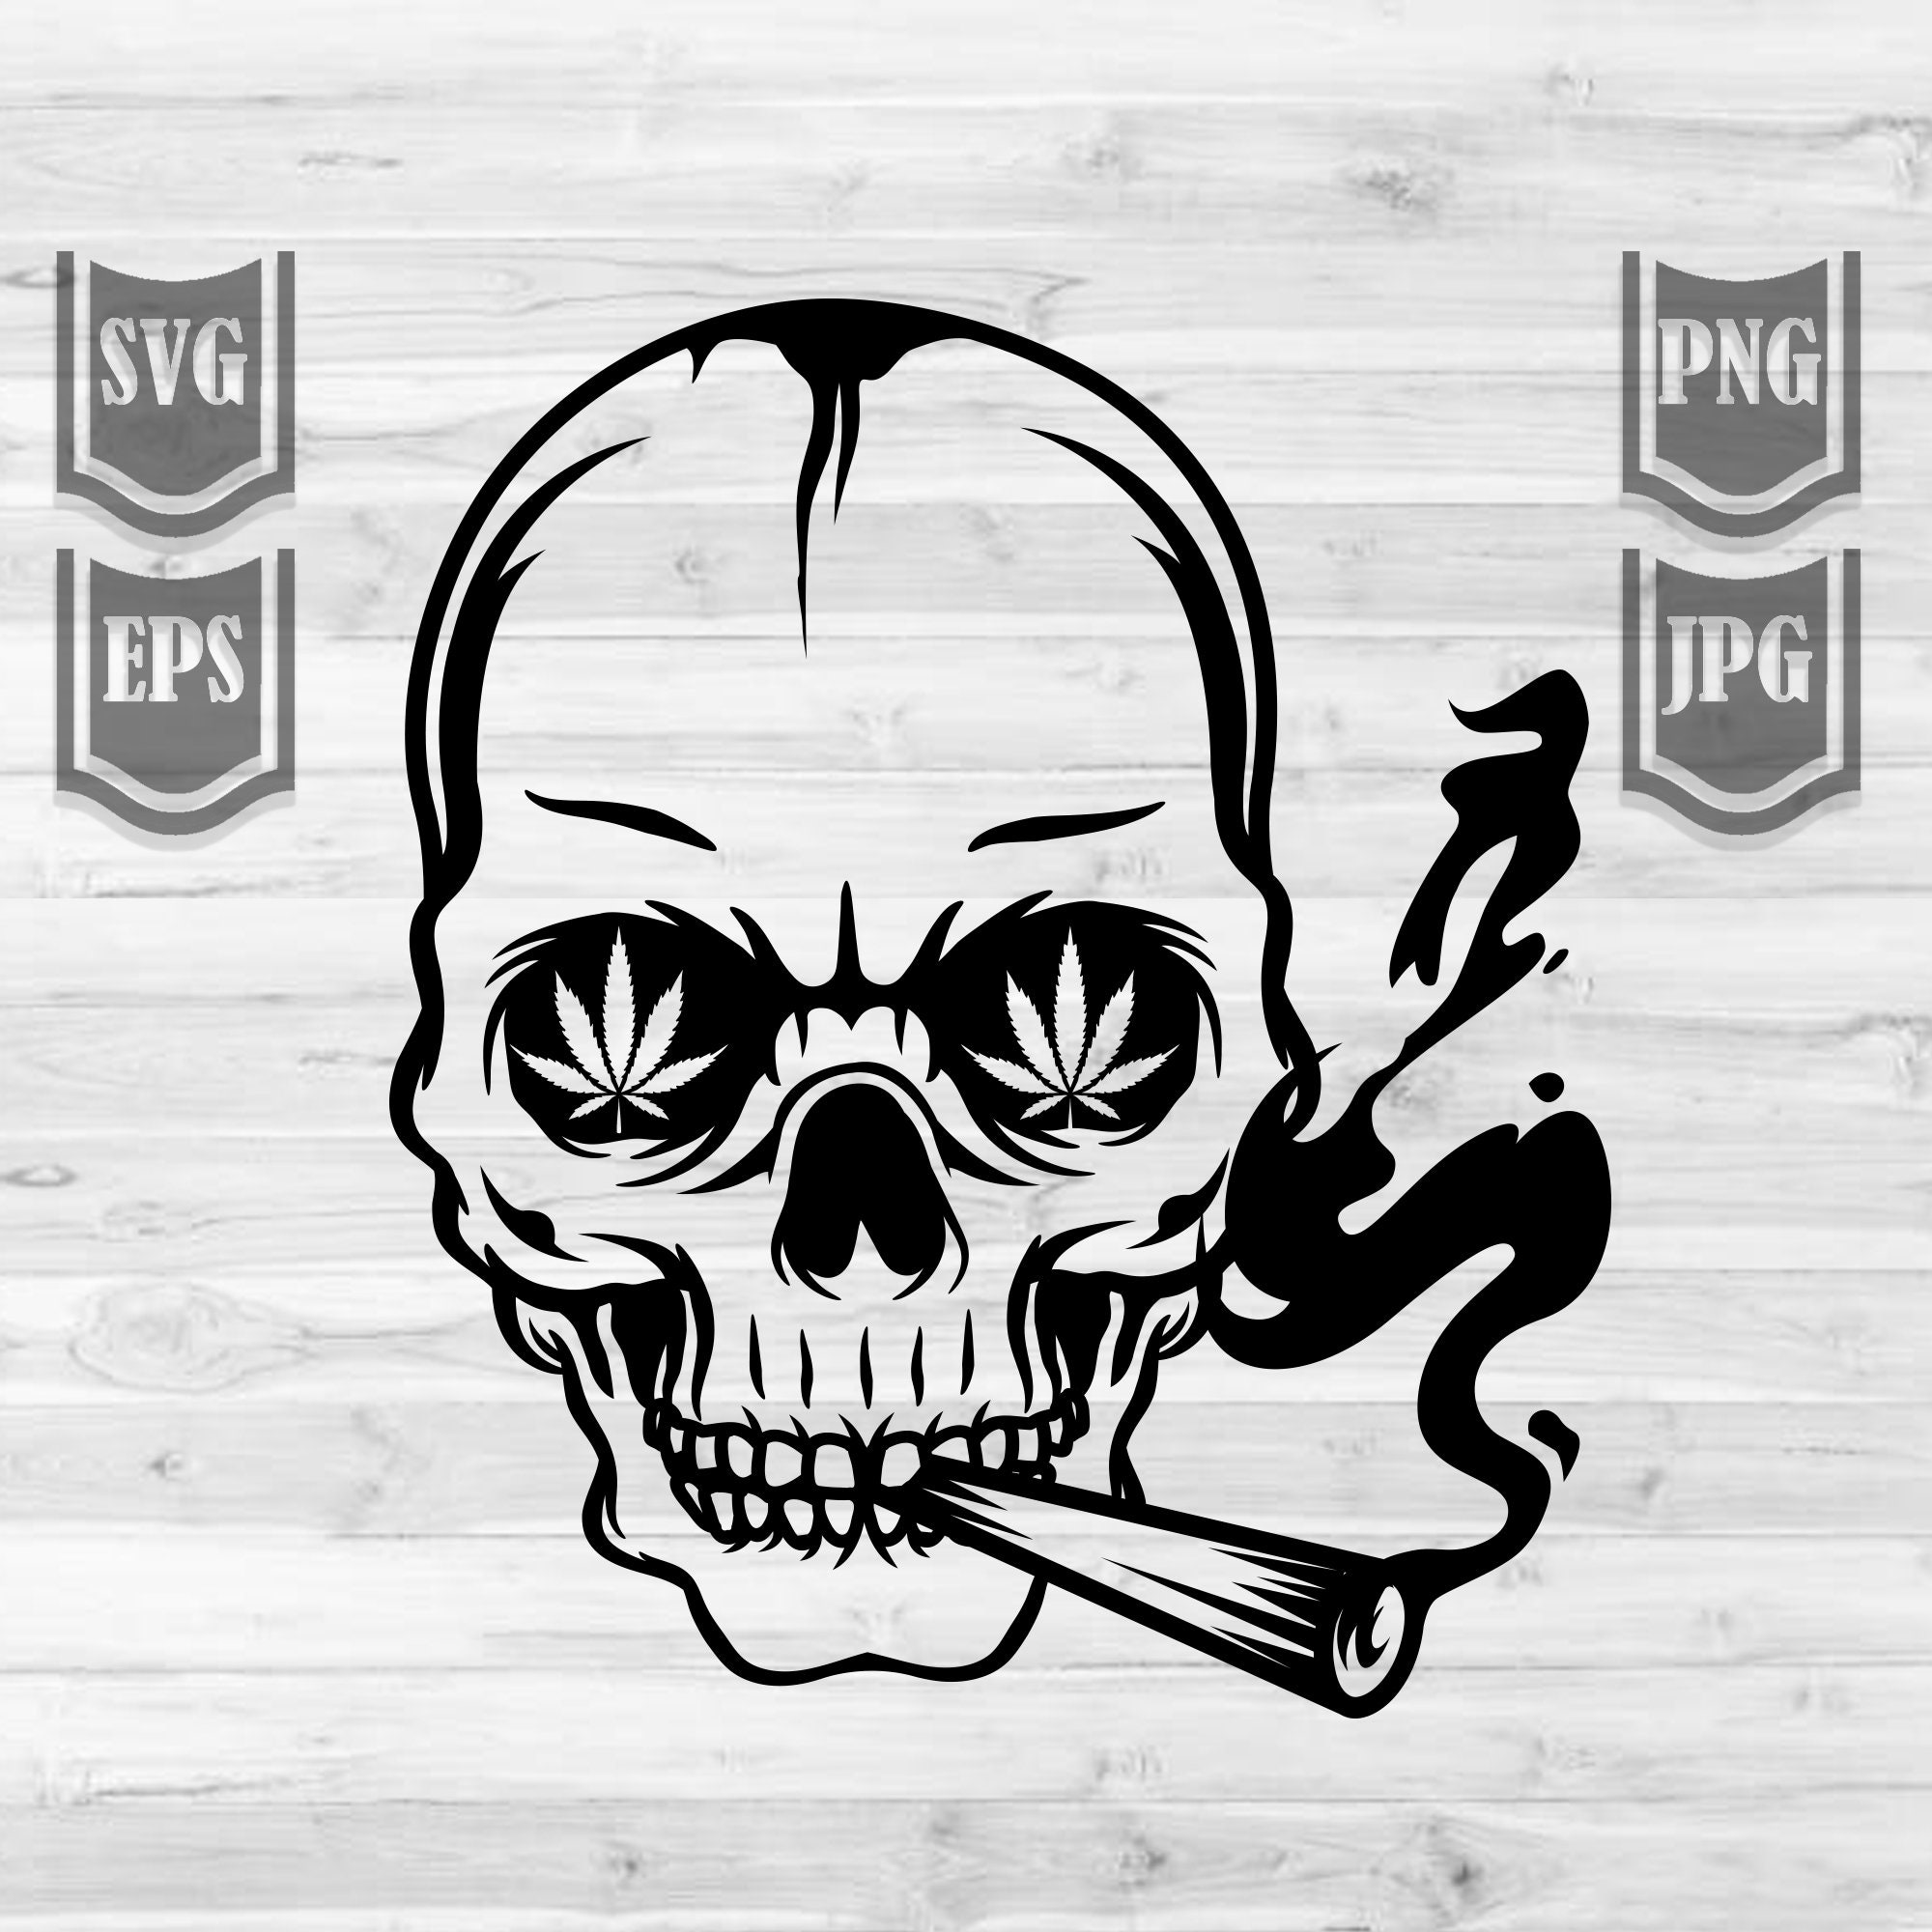 Smoking joint svg